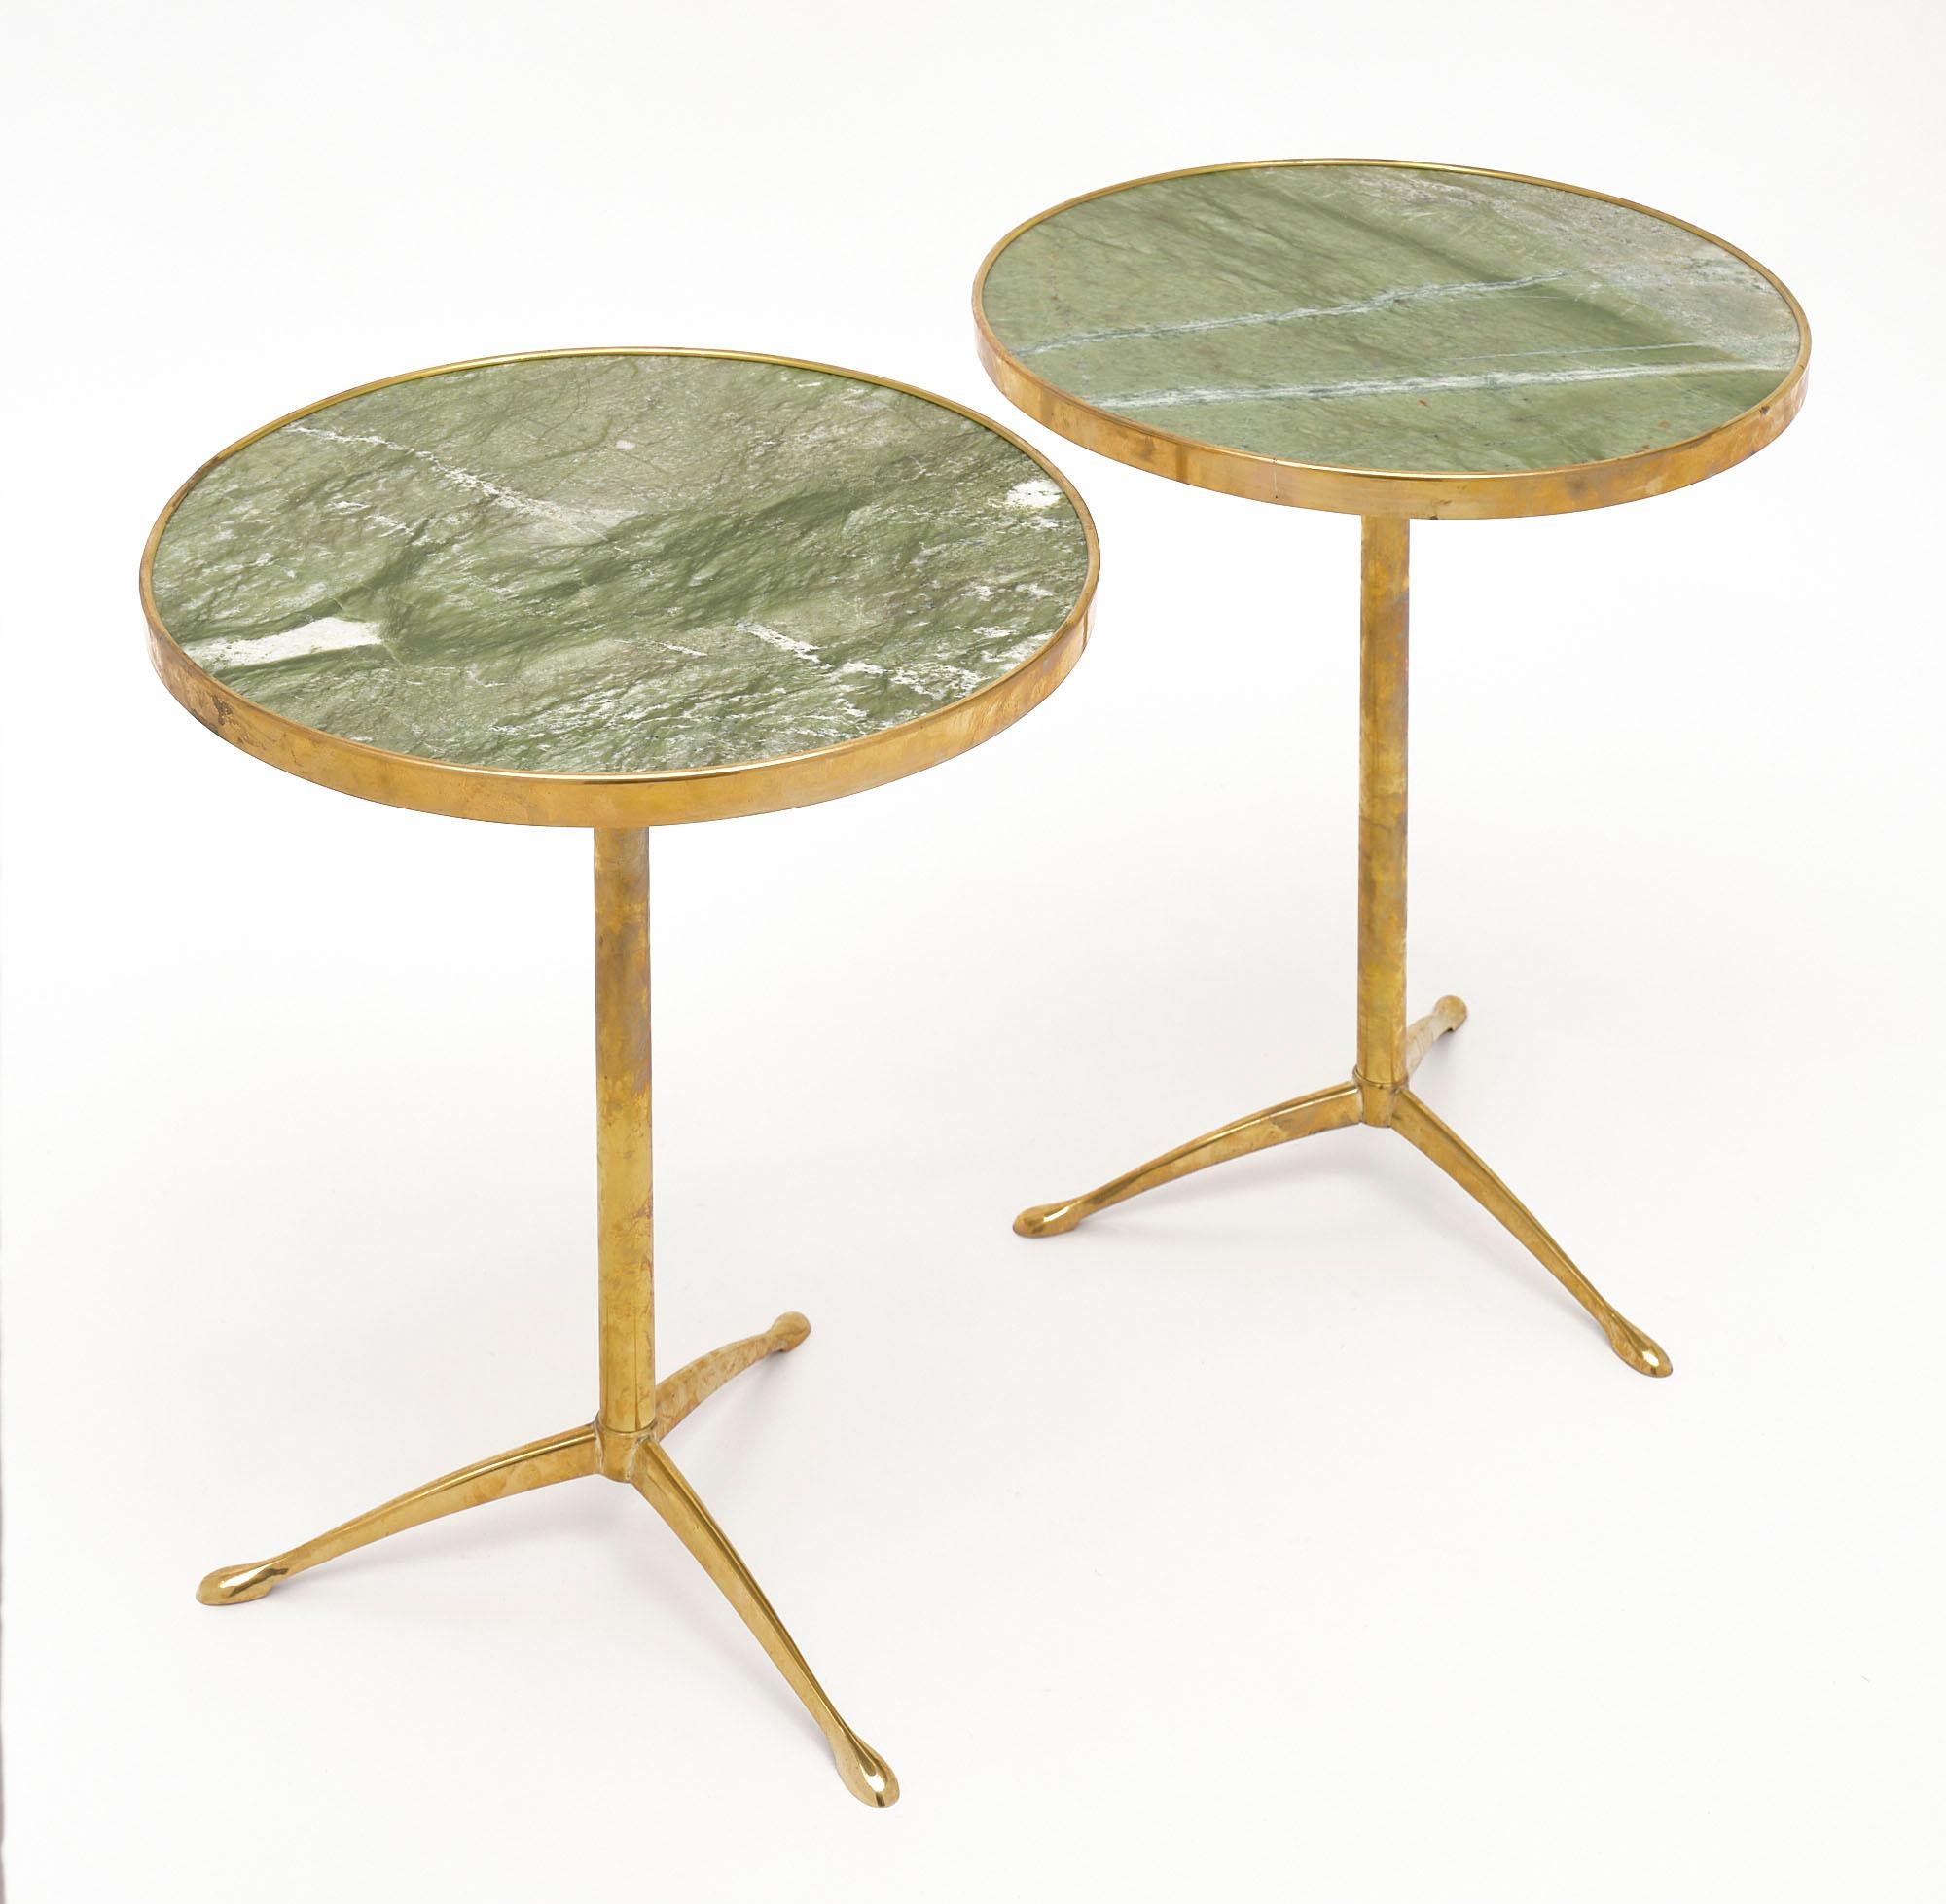 Pair of Italian brass and green marble side tables with beautiful “pieta verde” marble tops and solid gilt brass tripod structures.